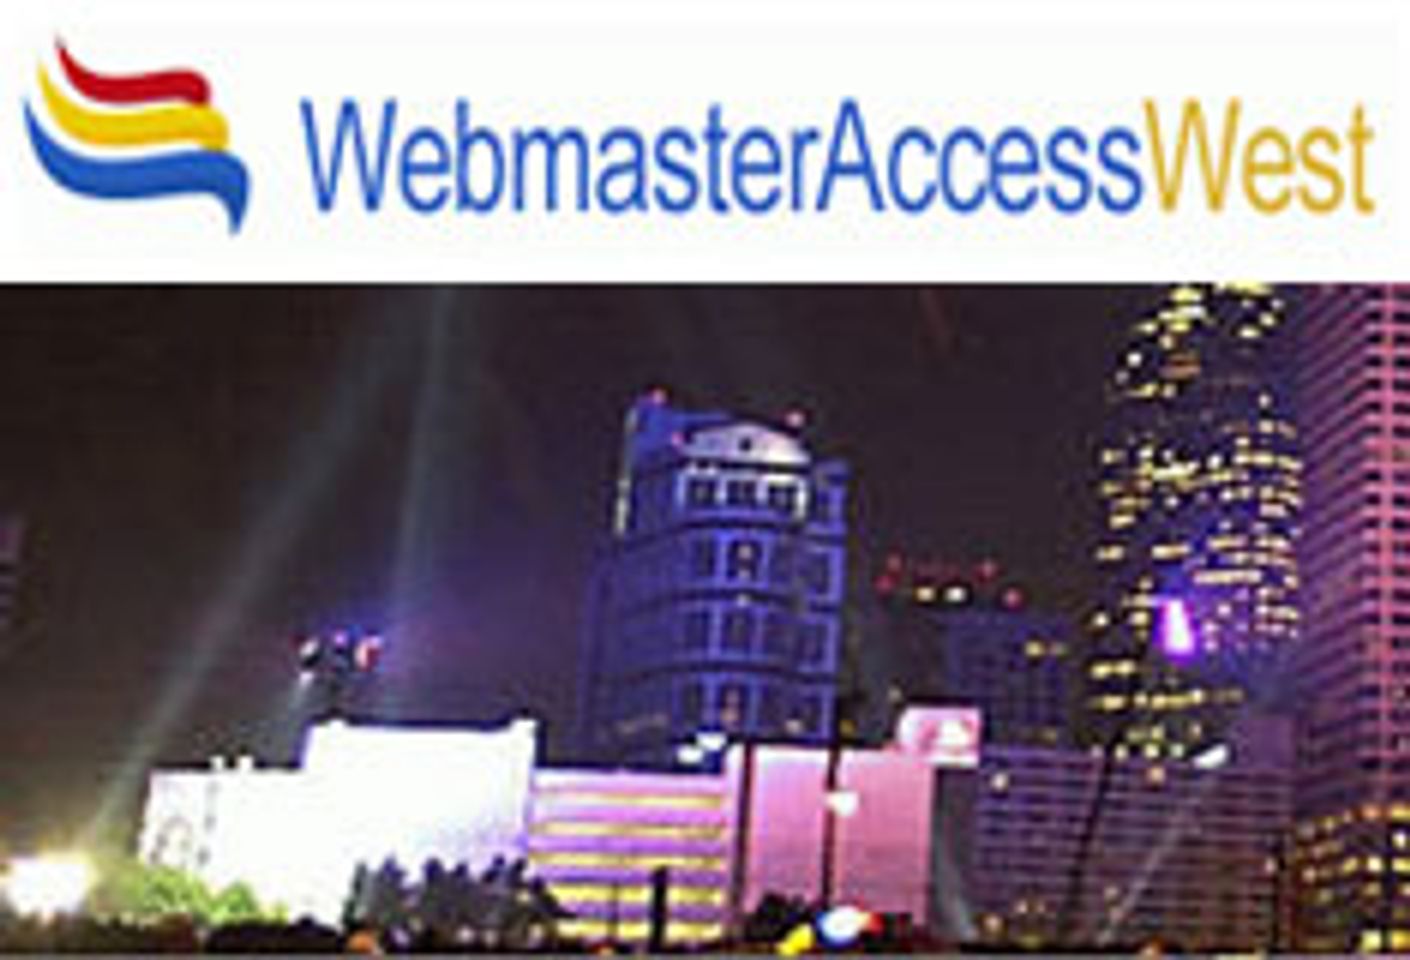 Mobile Updates for Webmaster Access Available